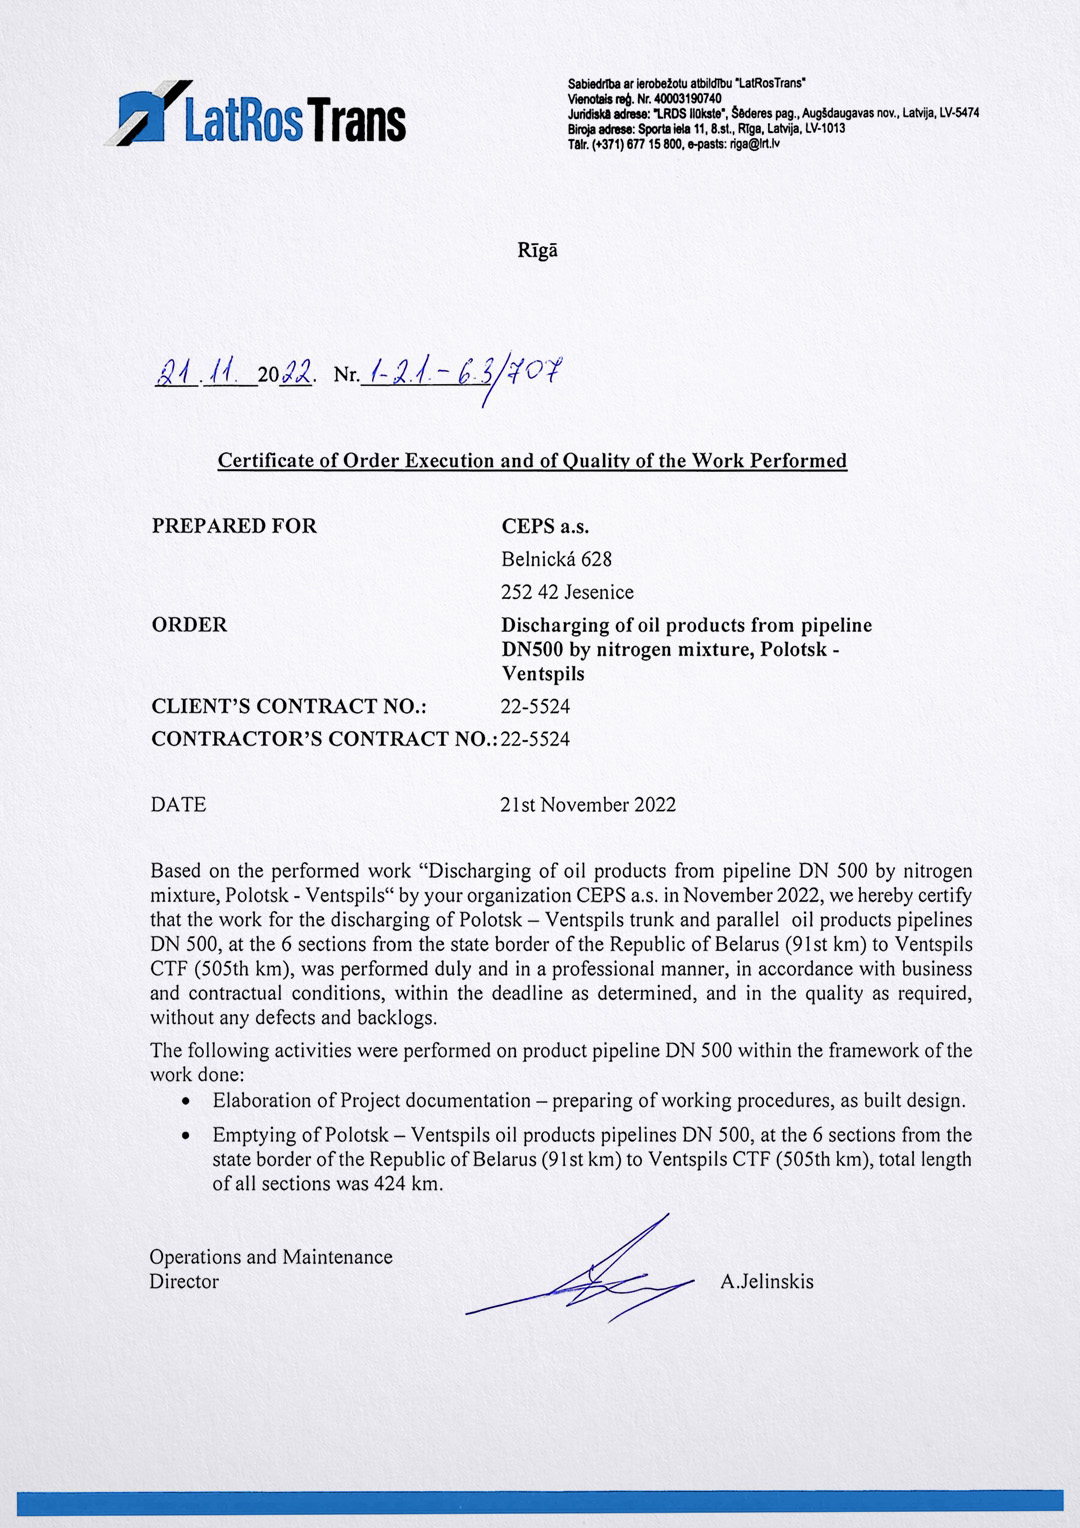 Certificate of order execution and of quality of the work performed